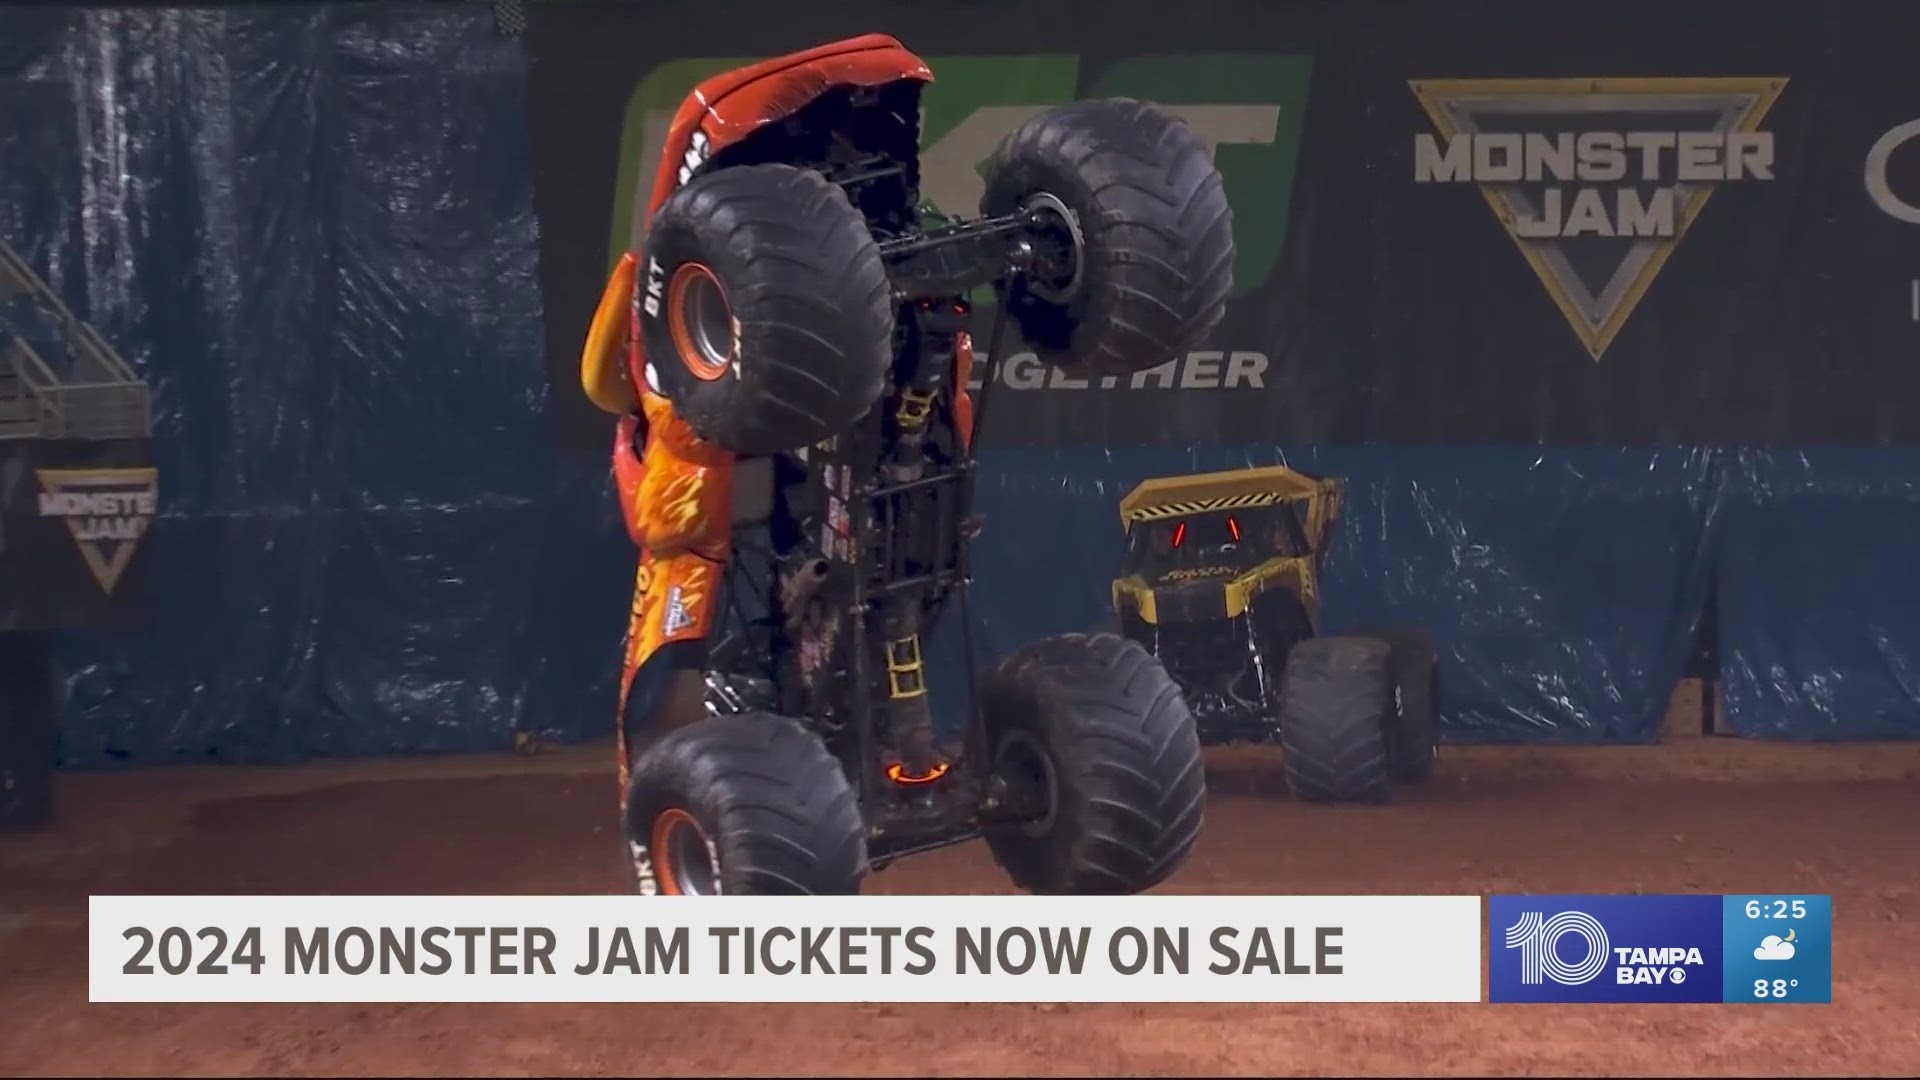 ​On Saturday, Feb. 10 and Sunday, Feb. 11, Monster Trucks weighing 12,000 pounds will hit the dirt at Raymond James Stadium.